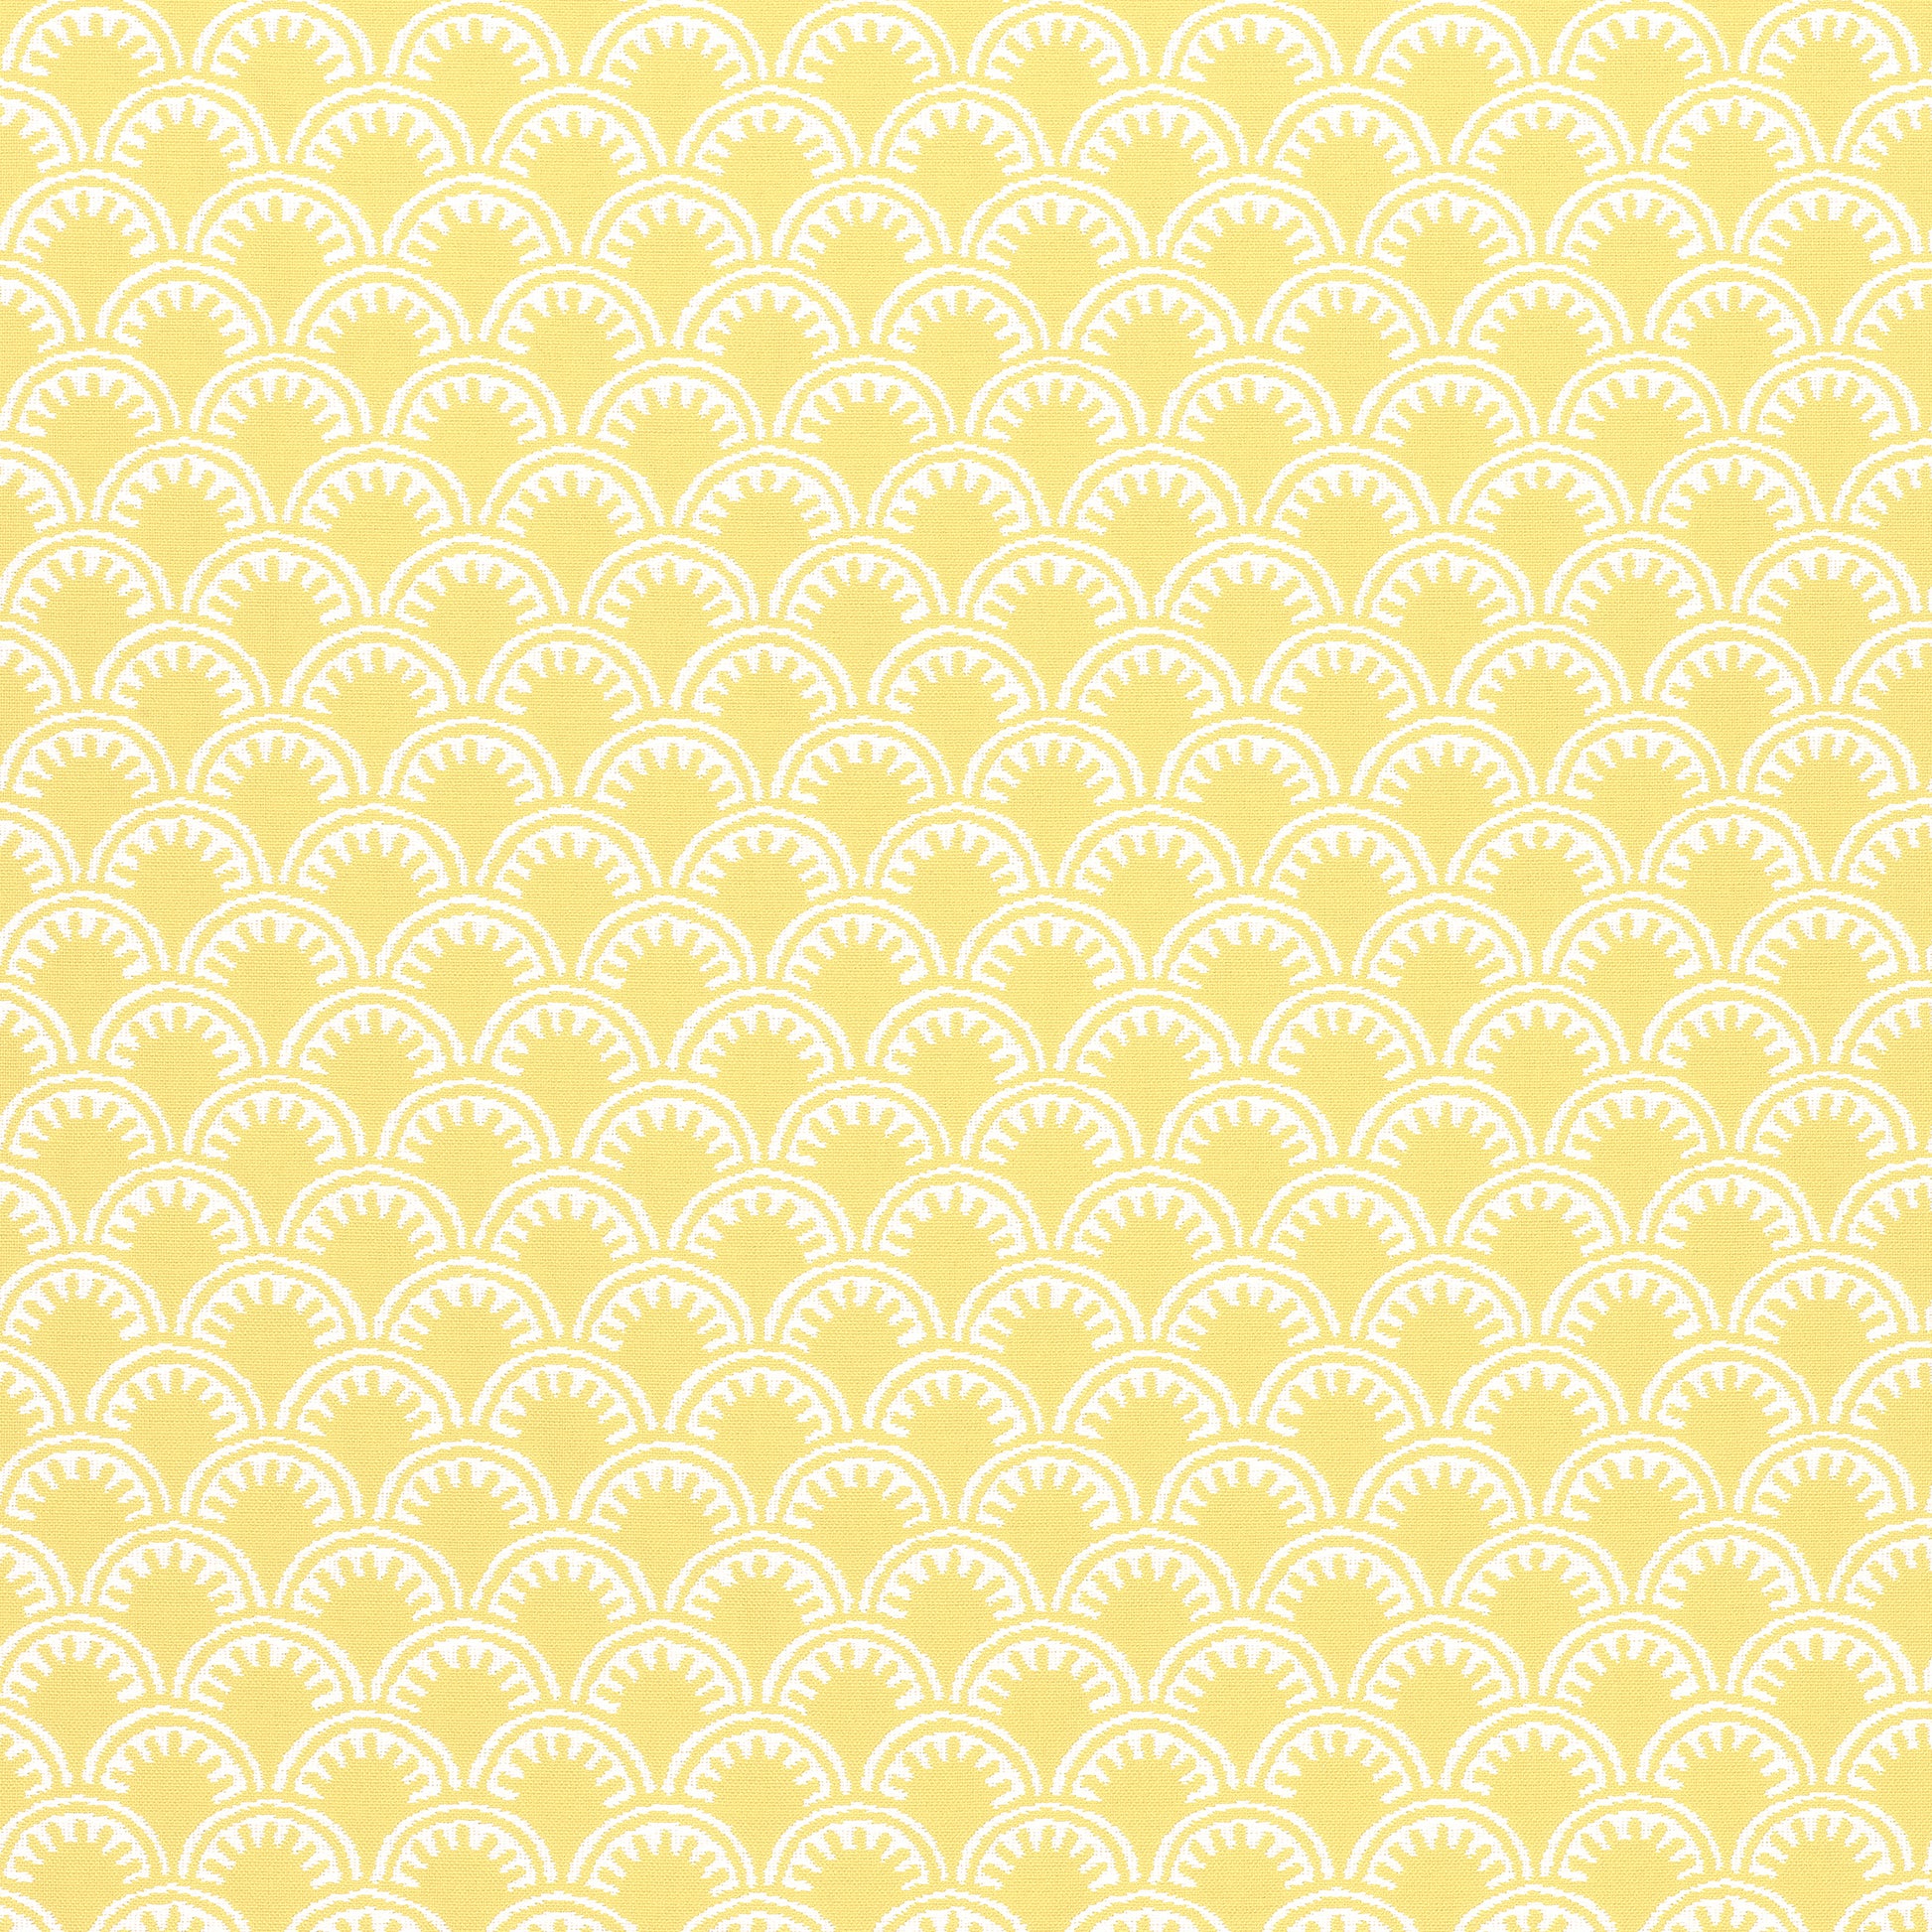 Purchase Thibaut Fabric Product W74636 pattern name Maisie color Sunshine